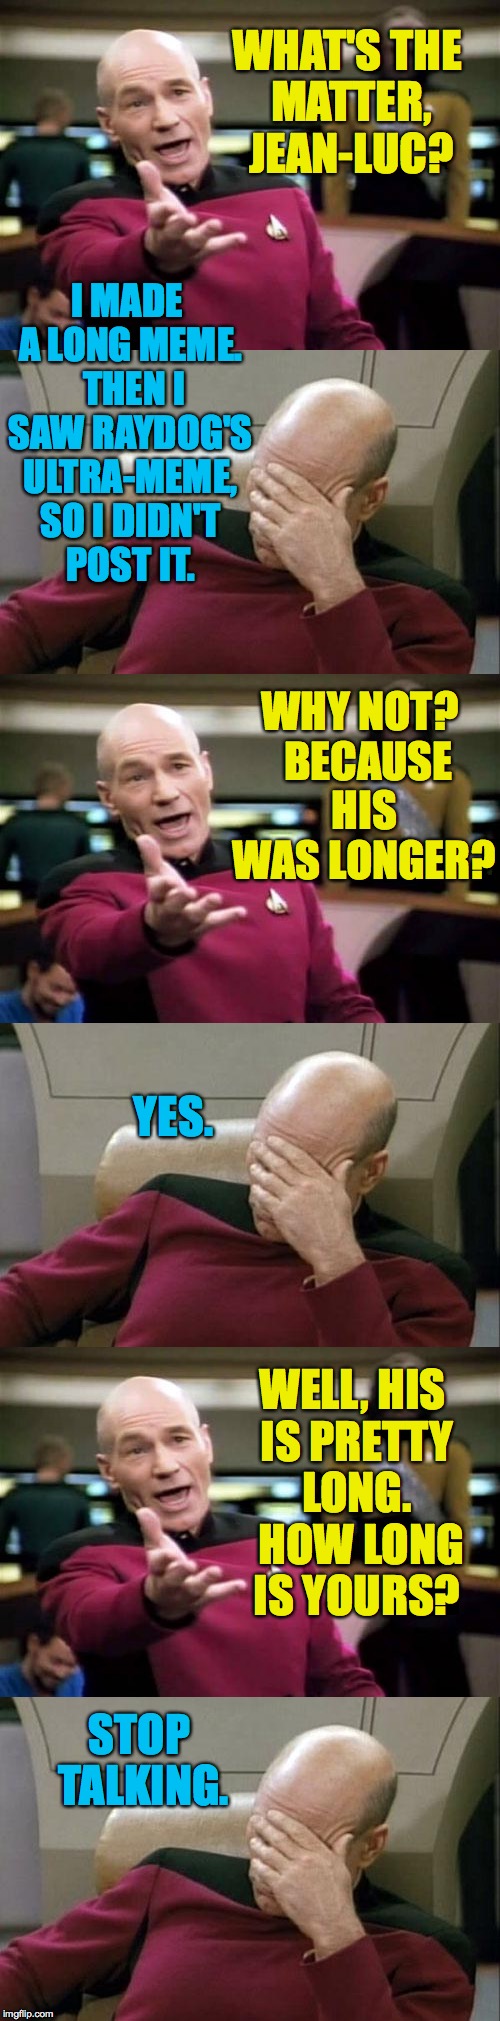 I Suffer from Meme Envy. | WHAT'S THE MATTER, JEAN-LUC? I MADE A LONG MEME.  THEN I SAW RAYDOG'S ULTRA-MEME, SO I DIDN'T POST IT. WHY NOT?  BECAUSE HIS WAS LONGER? YES. WELL, HIS IS PRETTY LONG.  HOW LONG IS YOURS? STOP TALKING. | image tagged in memes,raydog | made w/ Imgflip meme maker